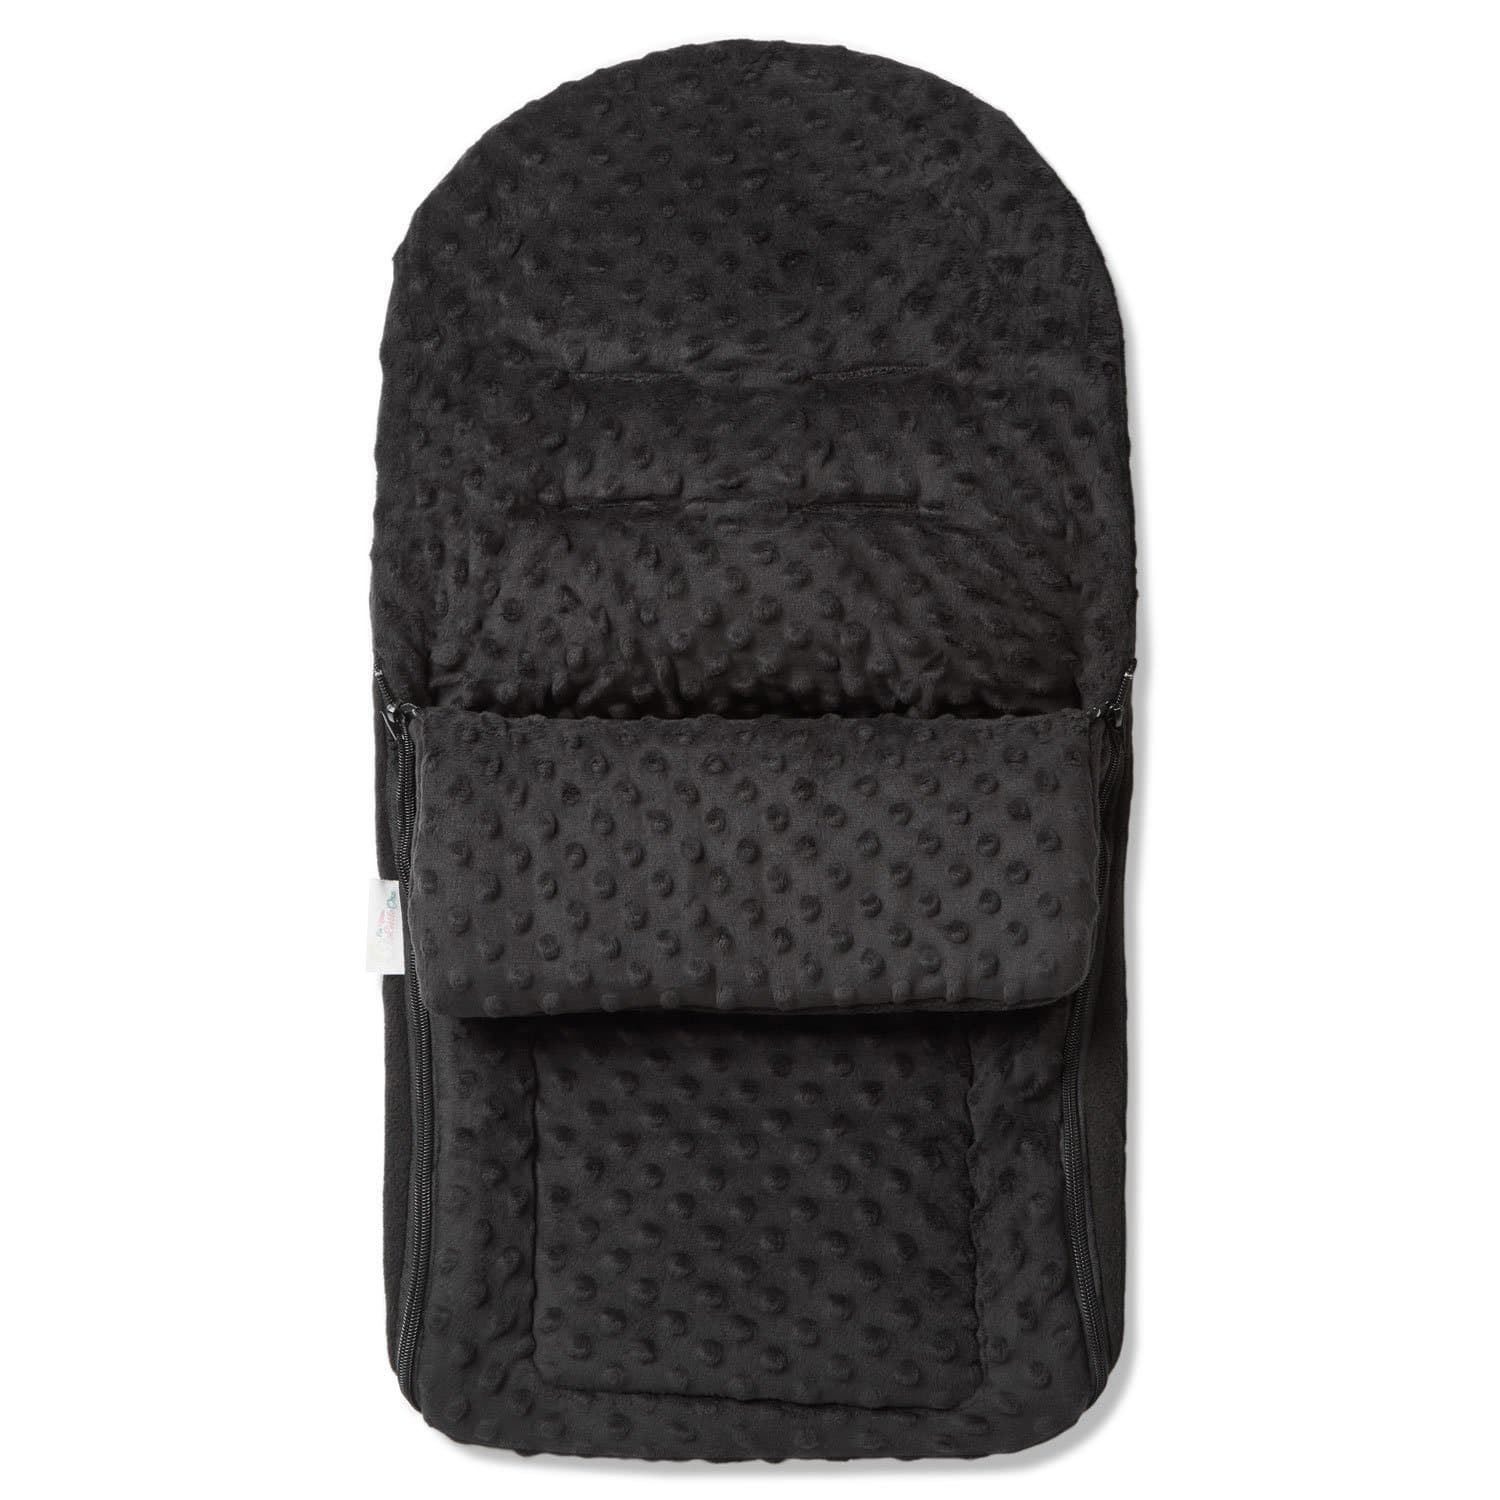 Dimple Car Seat Footmuff / Cosy Toes Compatible with Cosatto - For Your Little One